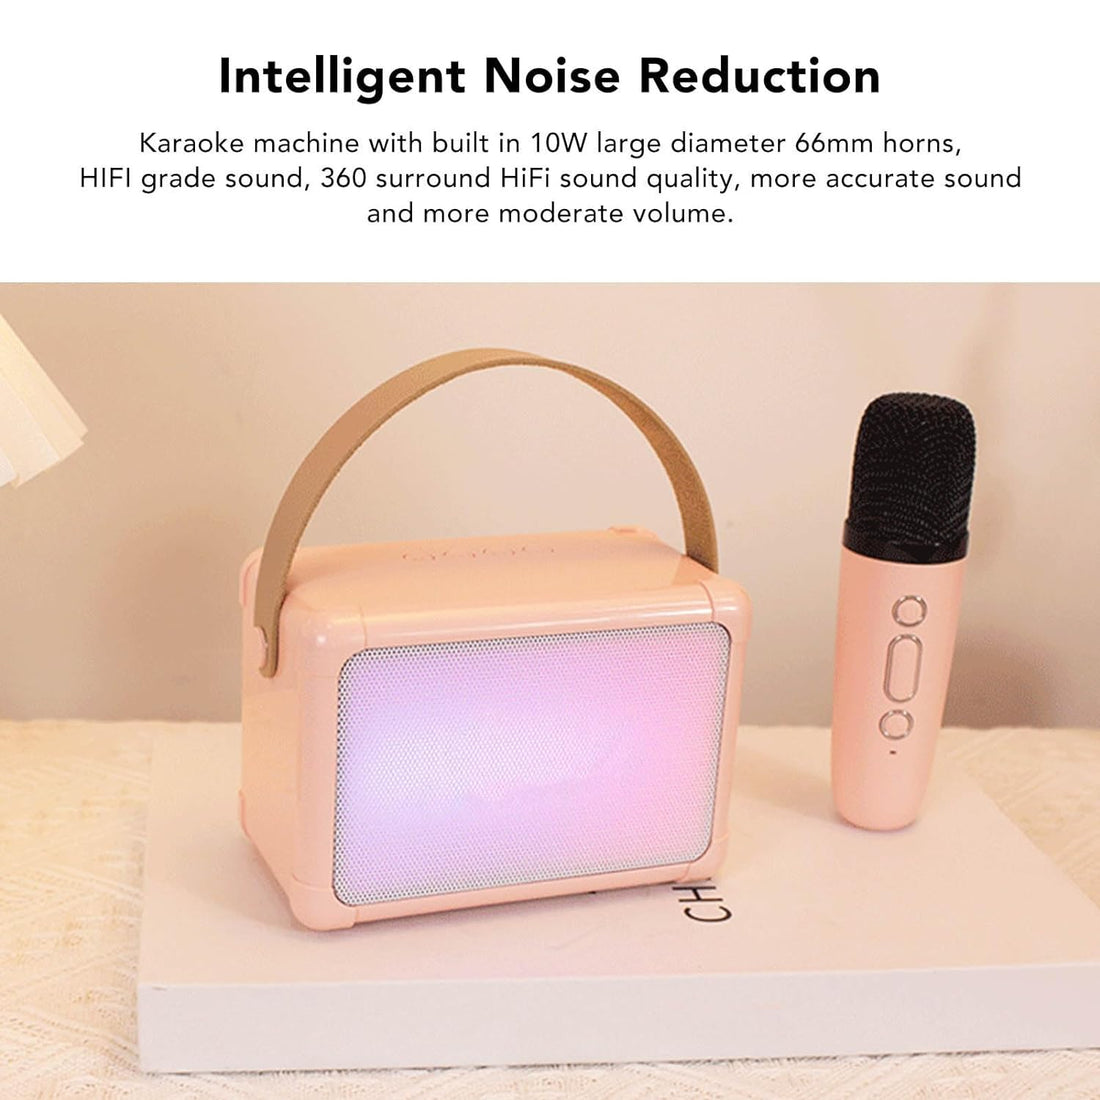 Mini Karaoke Machine, Stable HiFi Speaker Microphone Set 32ft Distance Multi Sound Effects Noise Reduction Dynamic Light for Home for Kids (#2)